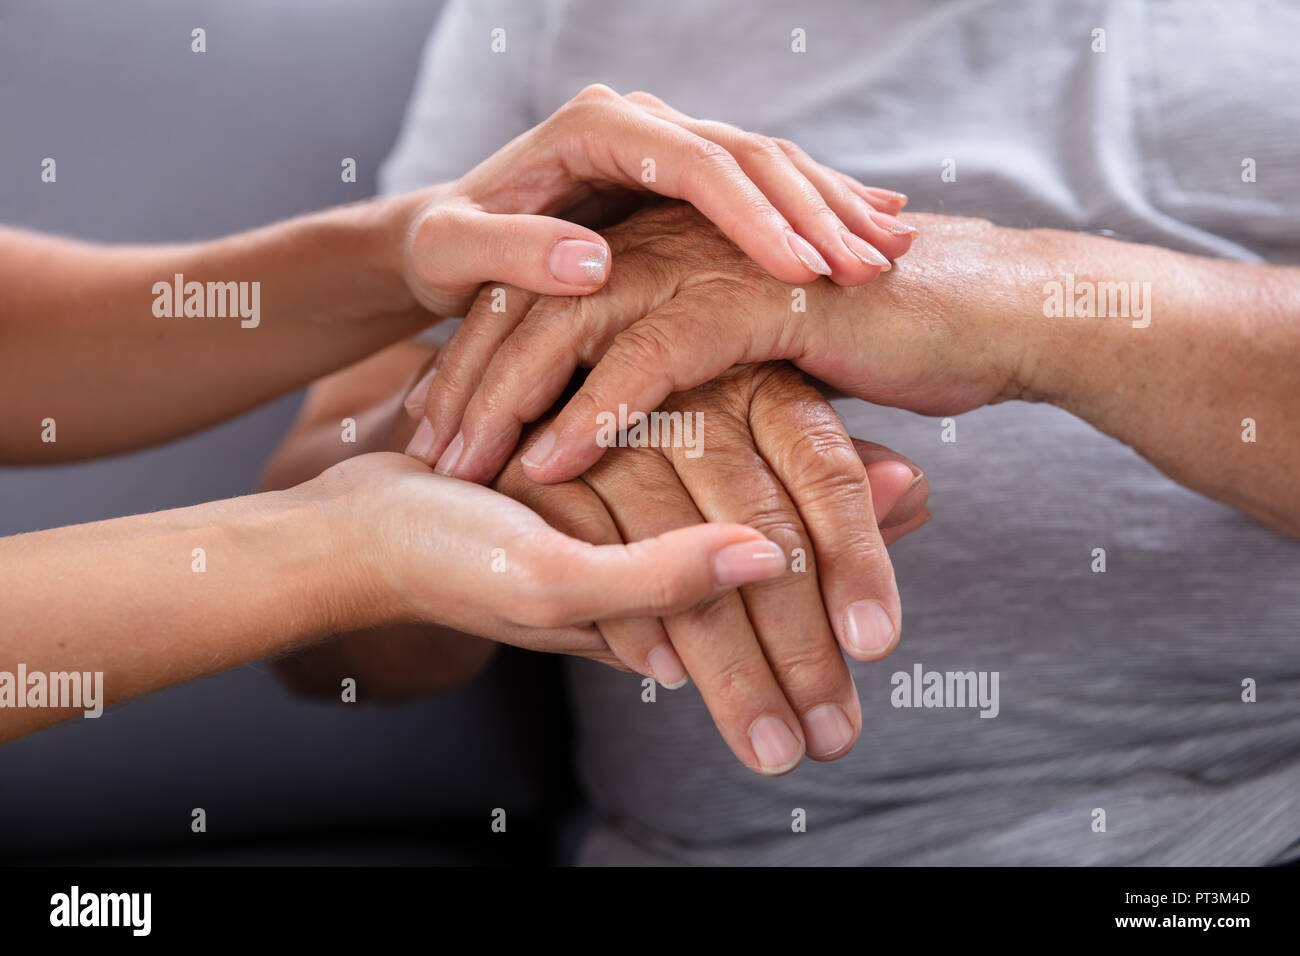 Close-up Of A Daughter Holding Her Elderly Father's Hand Stock Photo